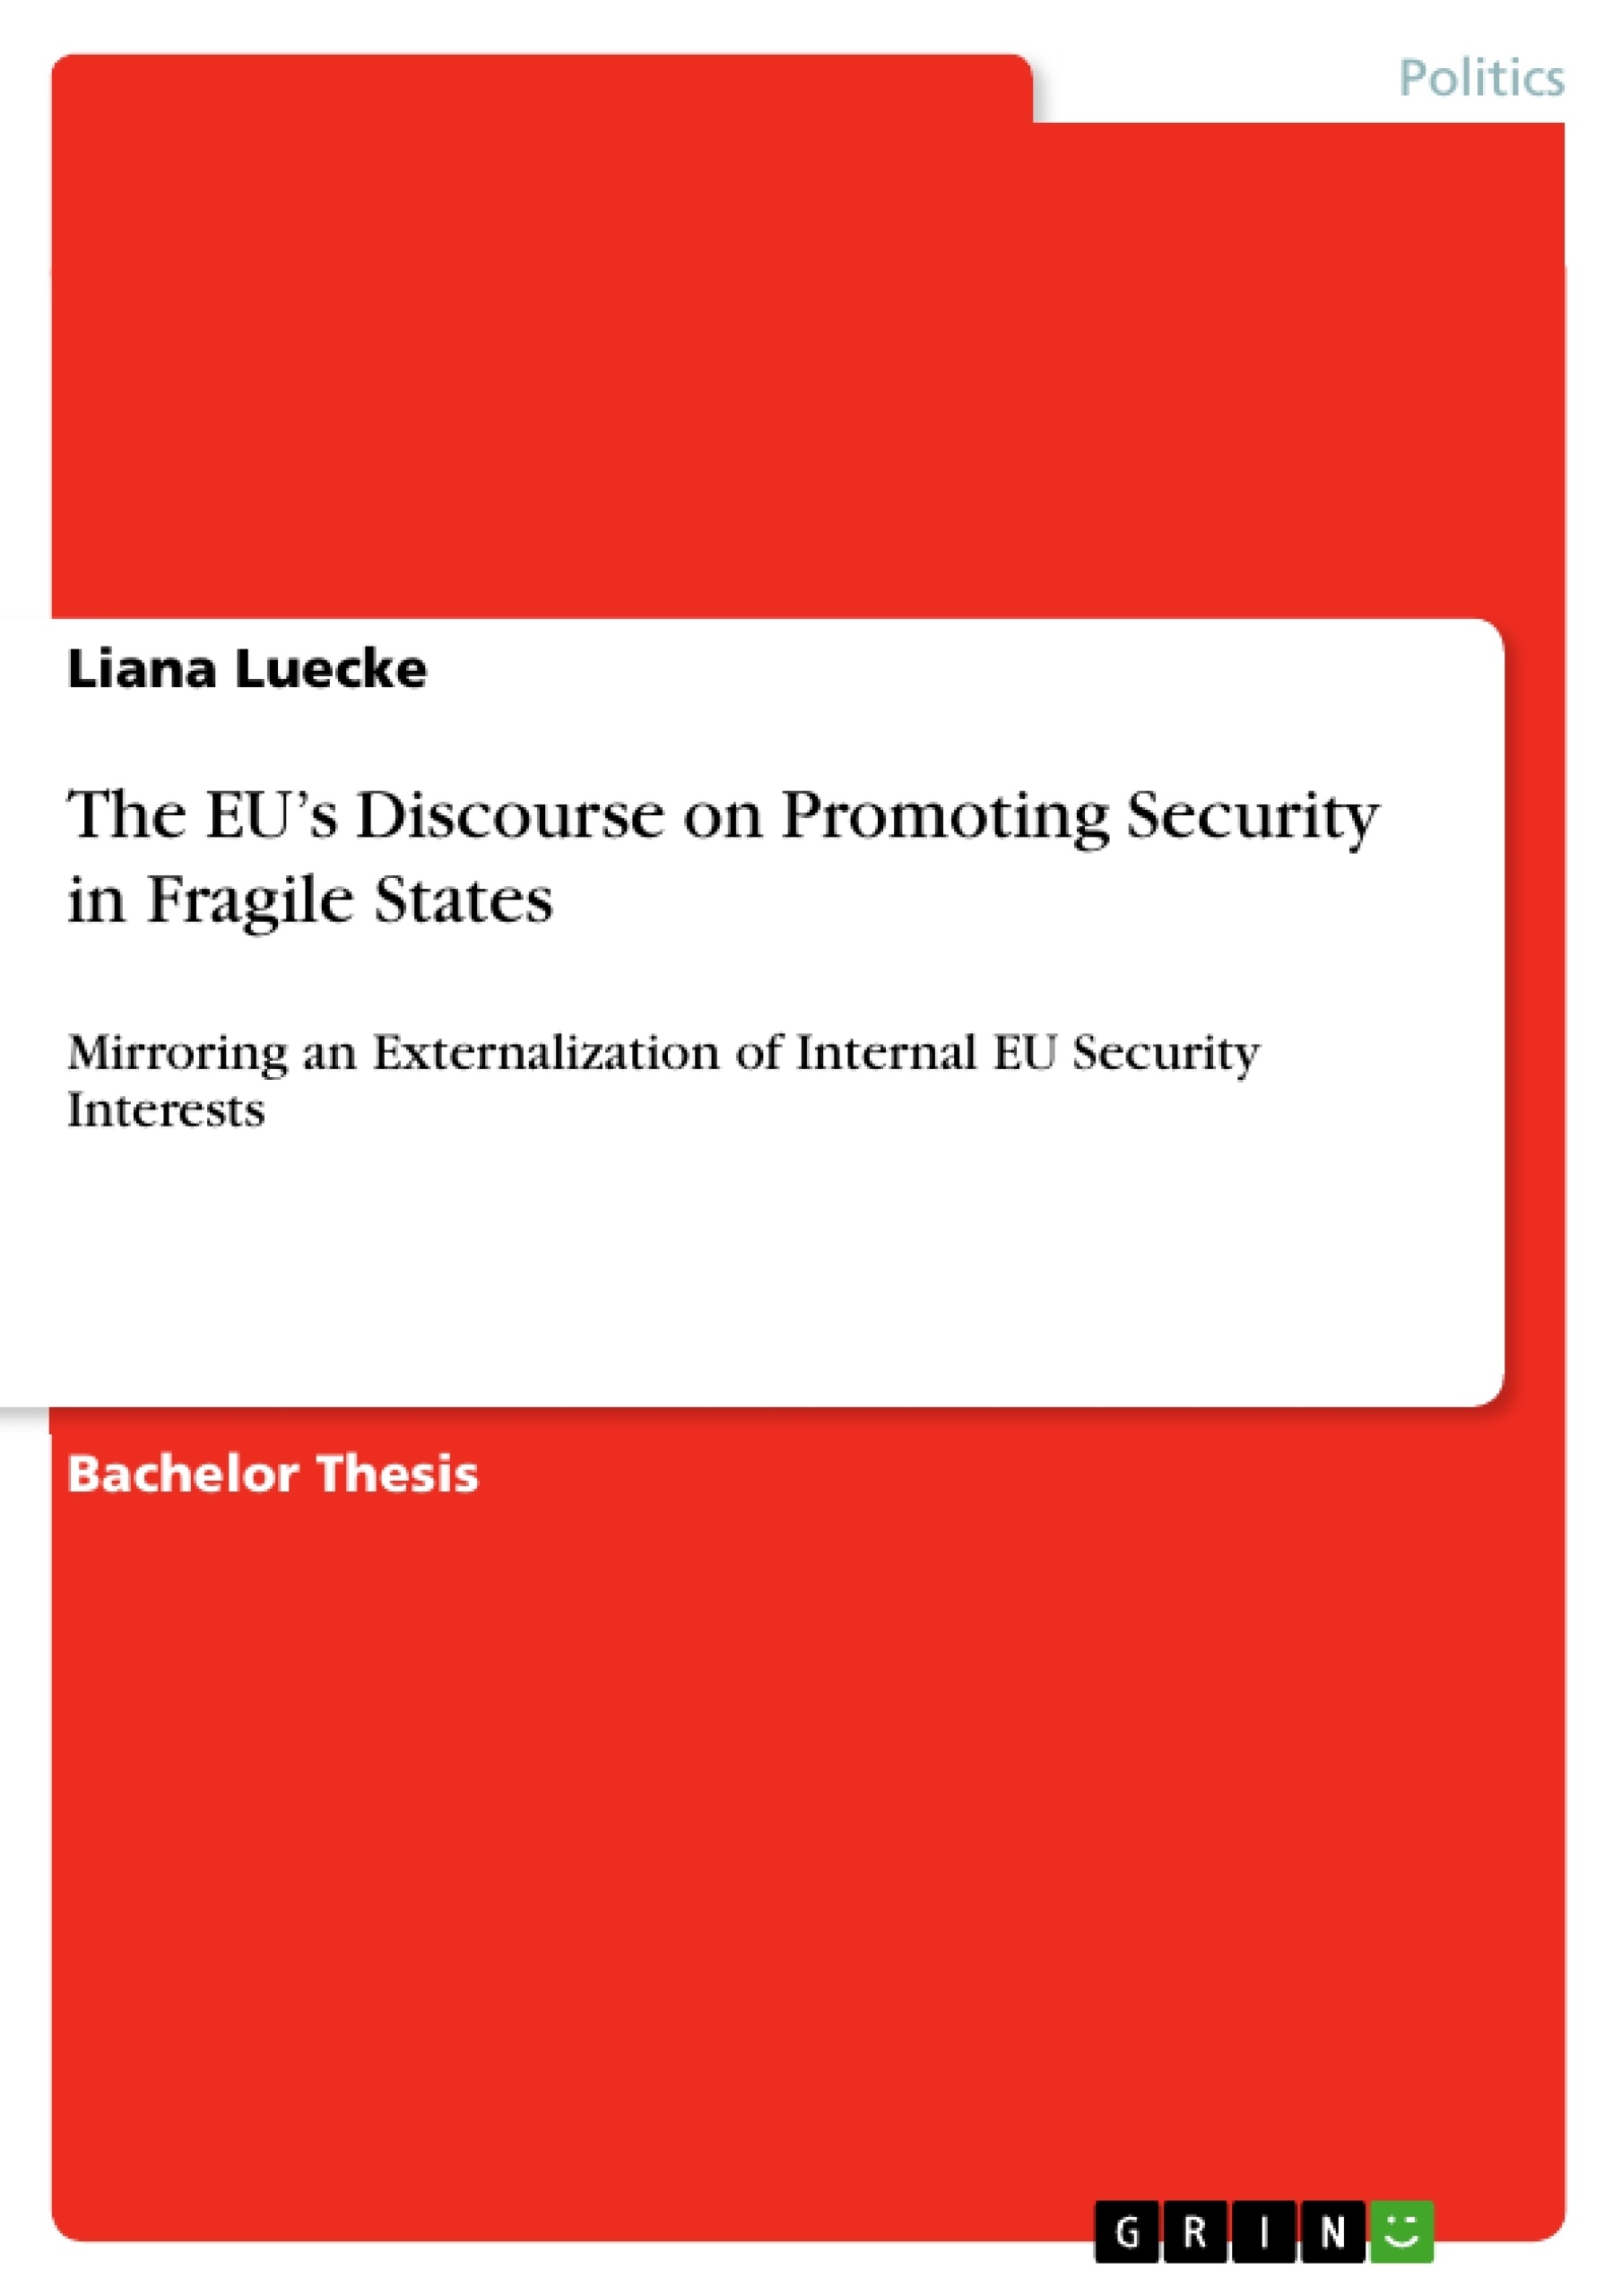 Título: The EU’s Discourse on Promoting Security in Fragile States